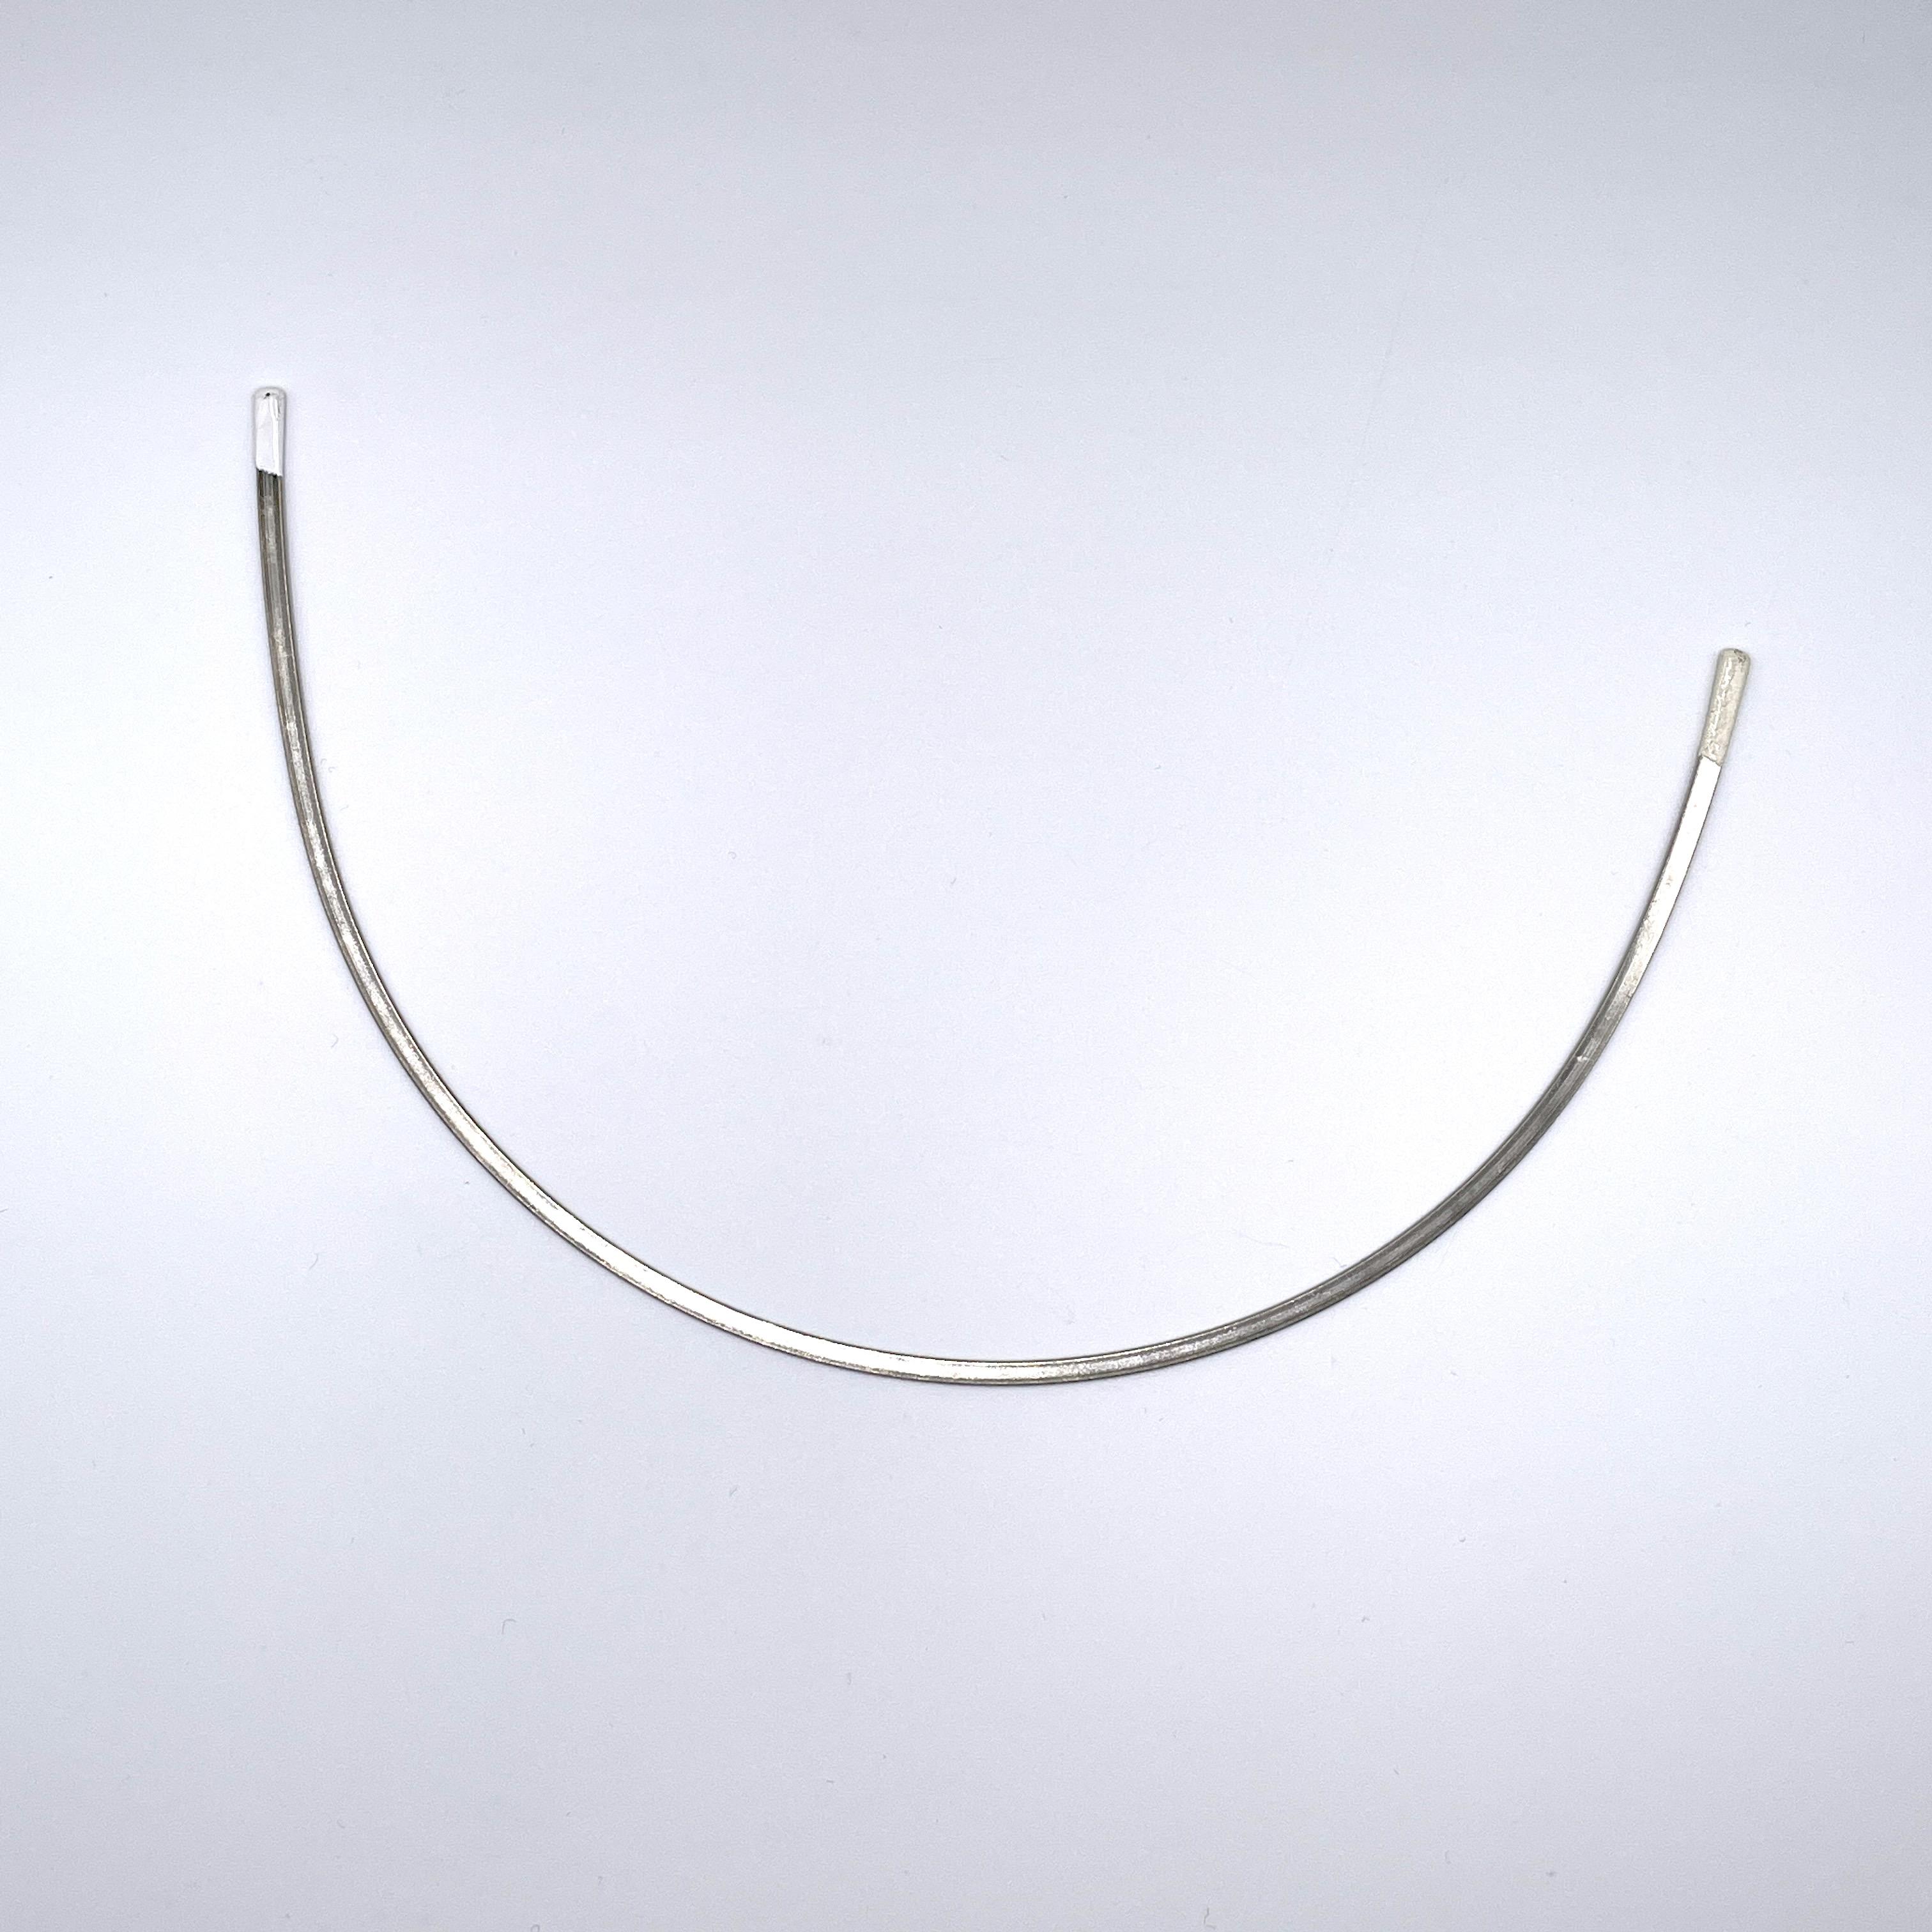 Pairs Coated Bra Underwire Replacement Stainless Steel Making